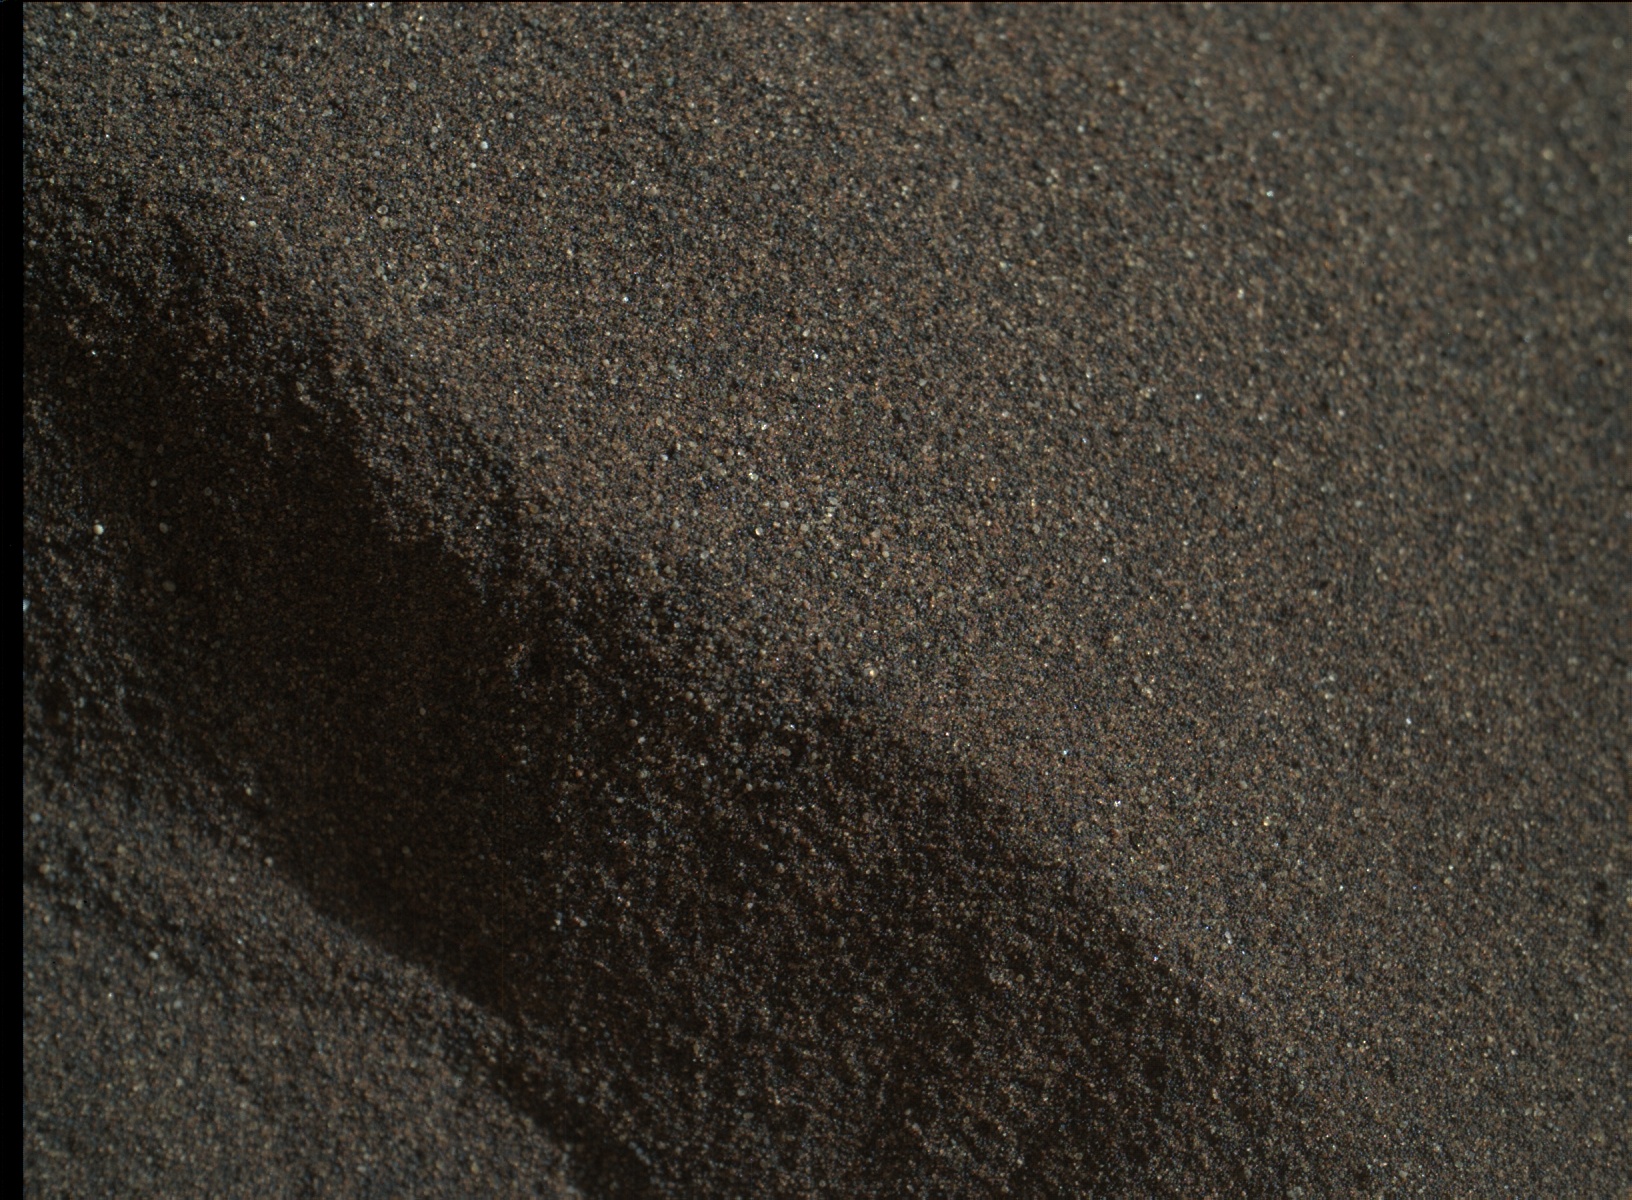 Nasa's Mars rover Curiosity acquired this image using its Mars Hand Lens Imager (MAHLI) on Sol 1223